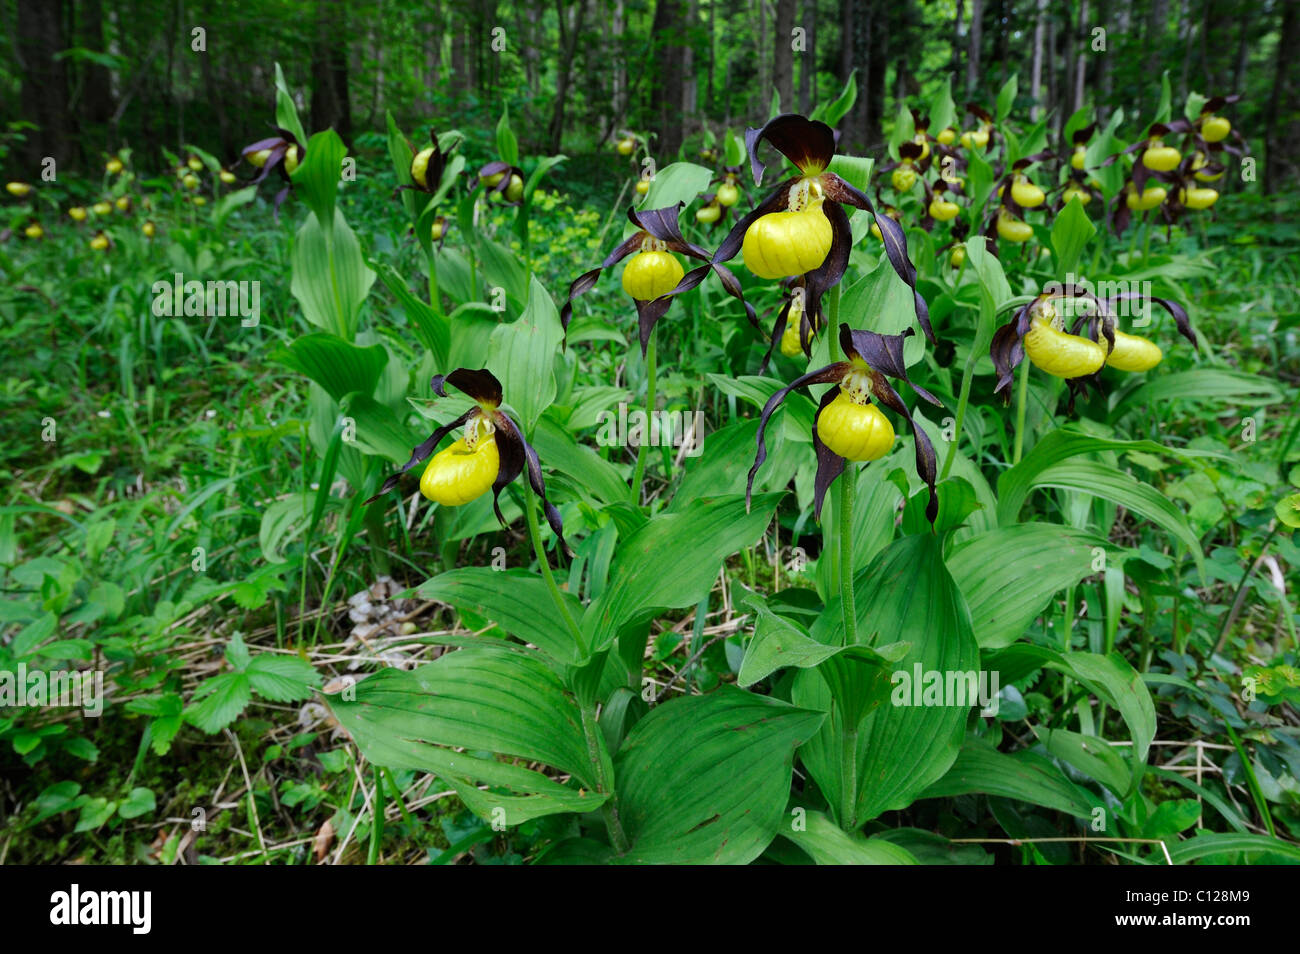 Lady's Slipper Orchid (Cypripedium calceolus), flowers in the countryside, Swabian Alb, Baden-Wuerttemberg, Germany, Europe Stock Photo